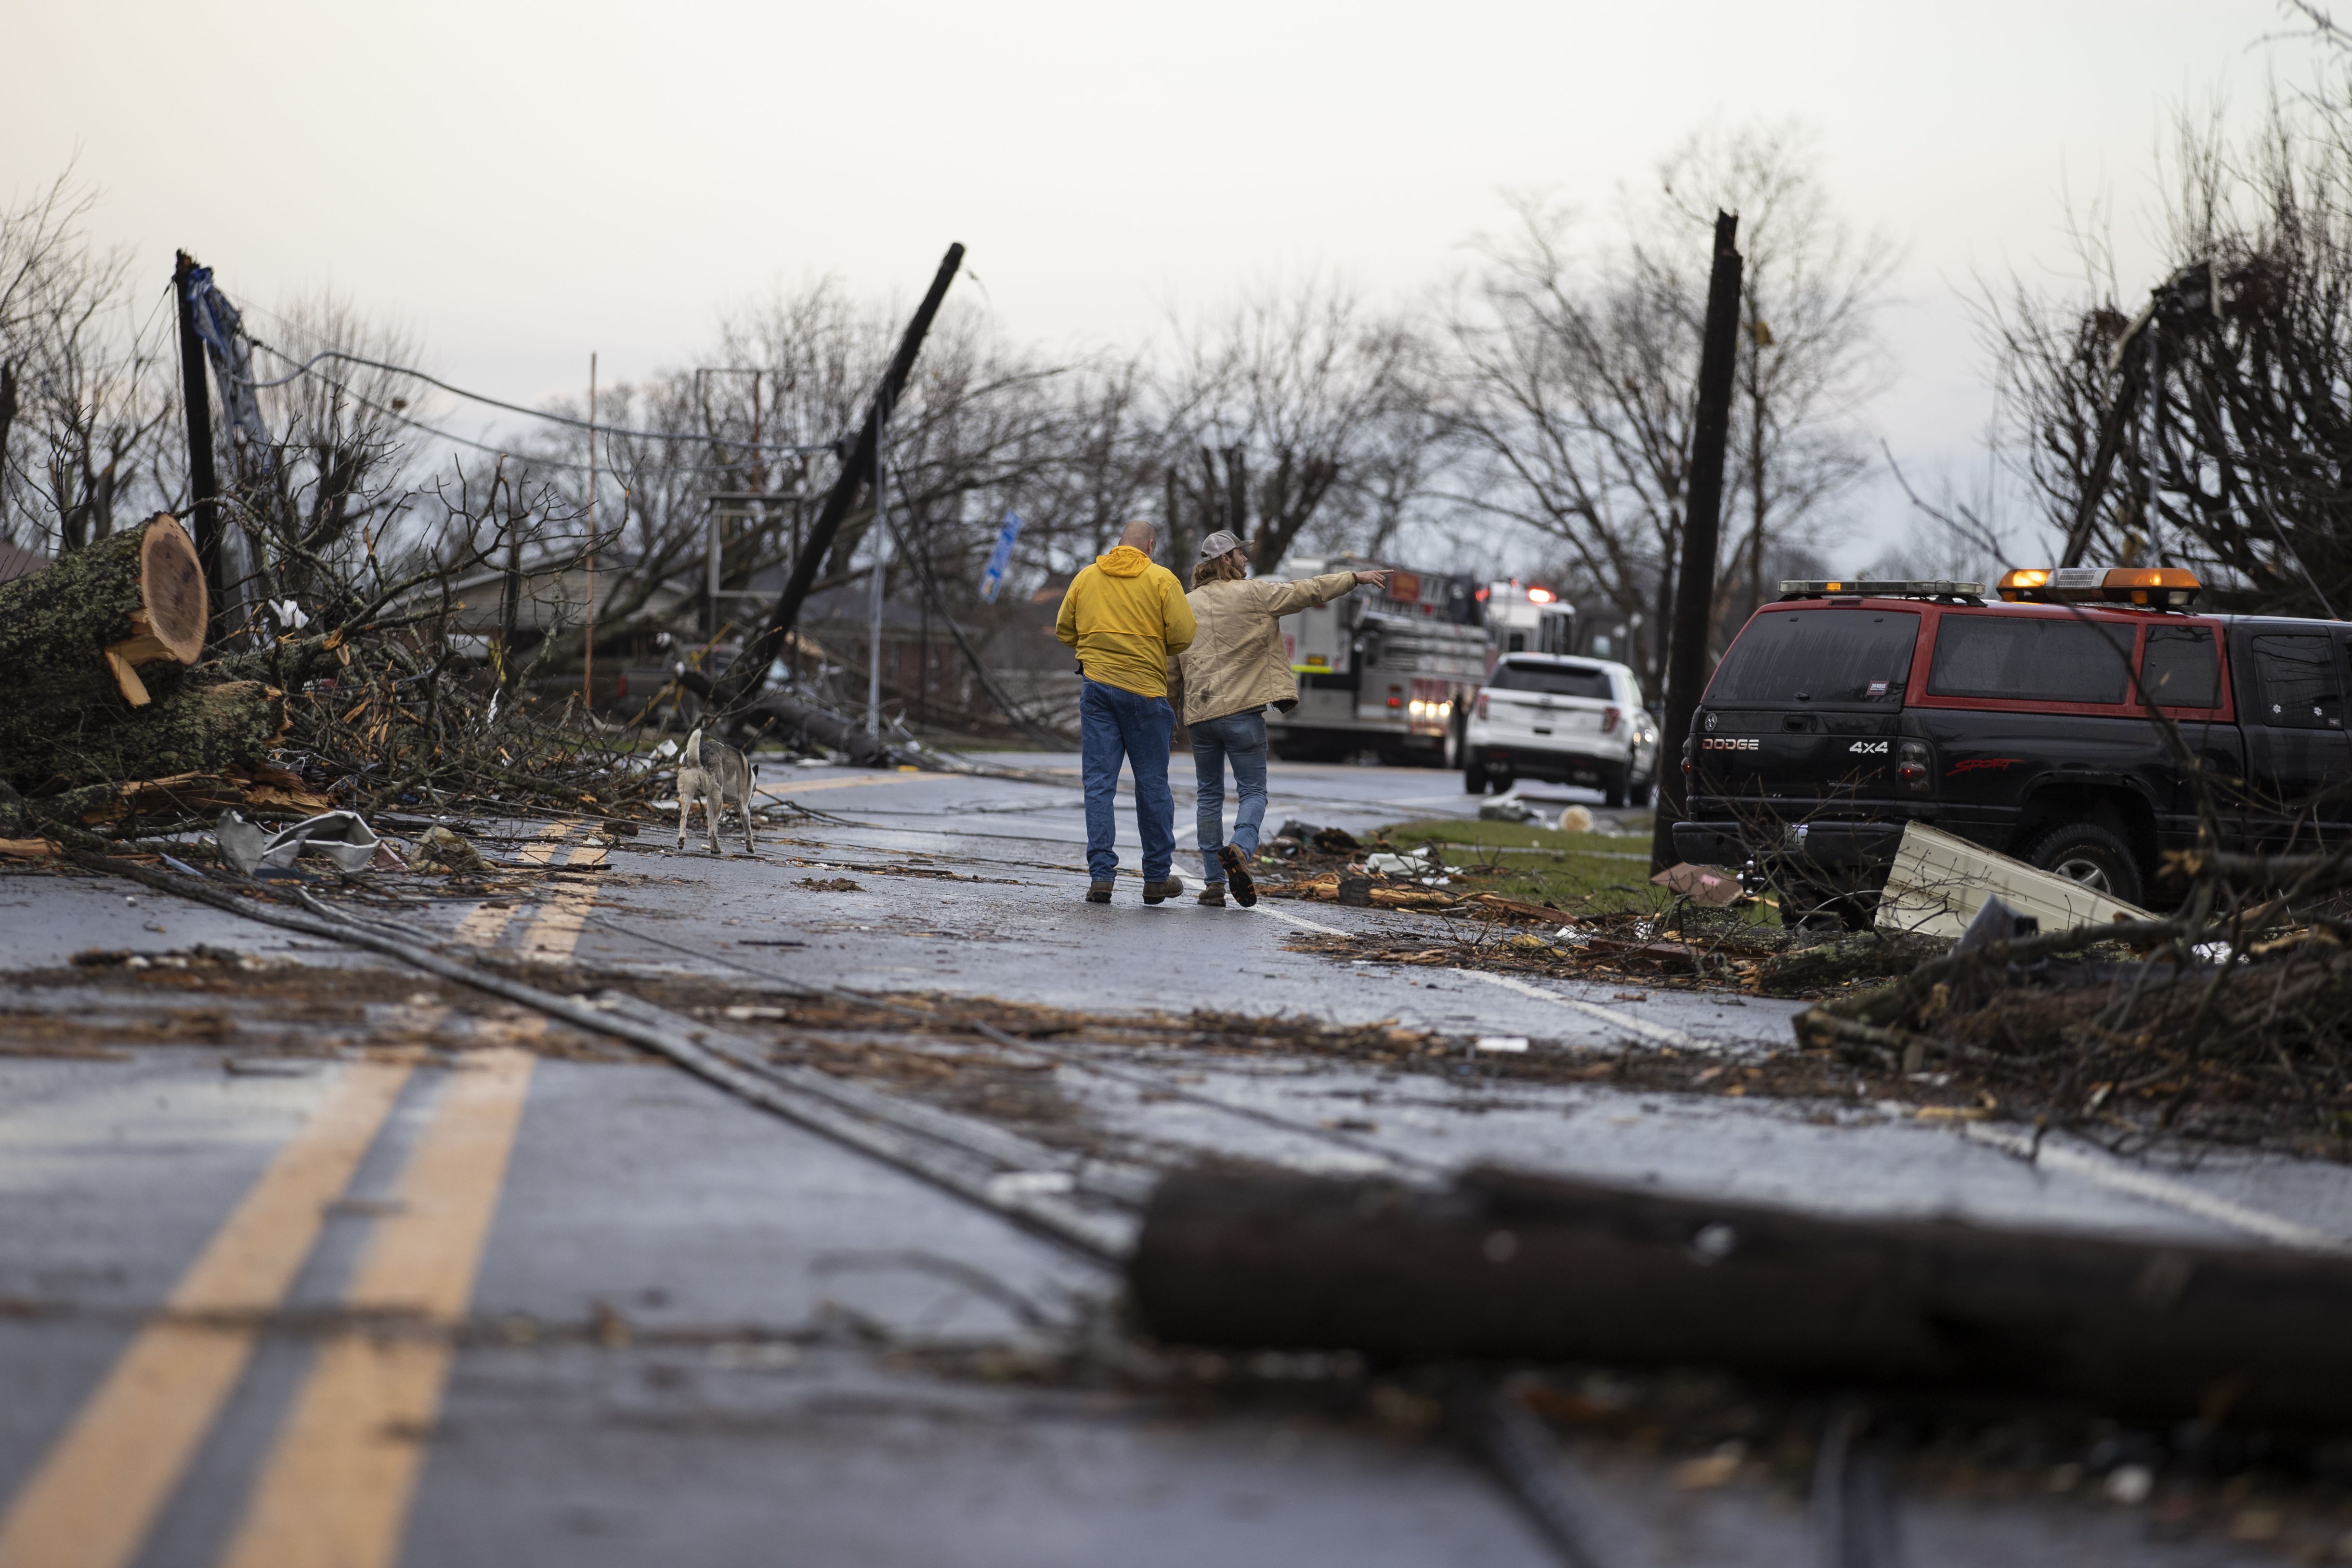 Residents walk through downed utility lines and trees to survey damage